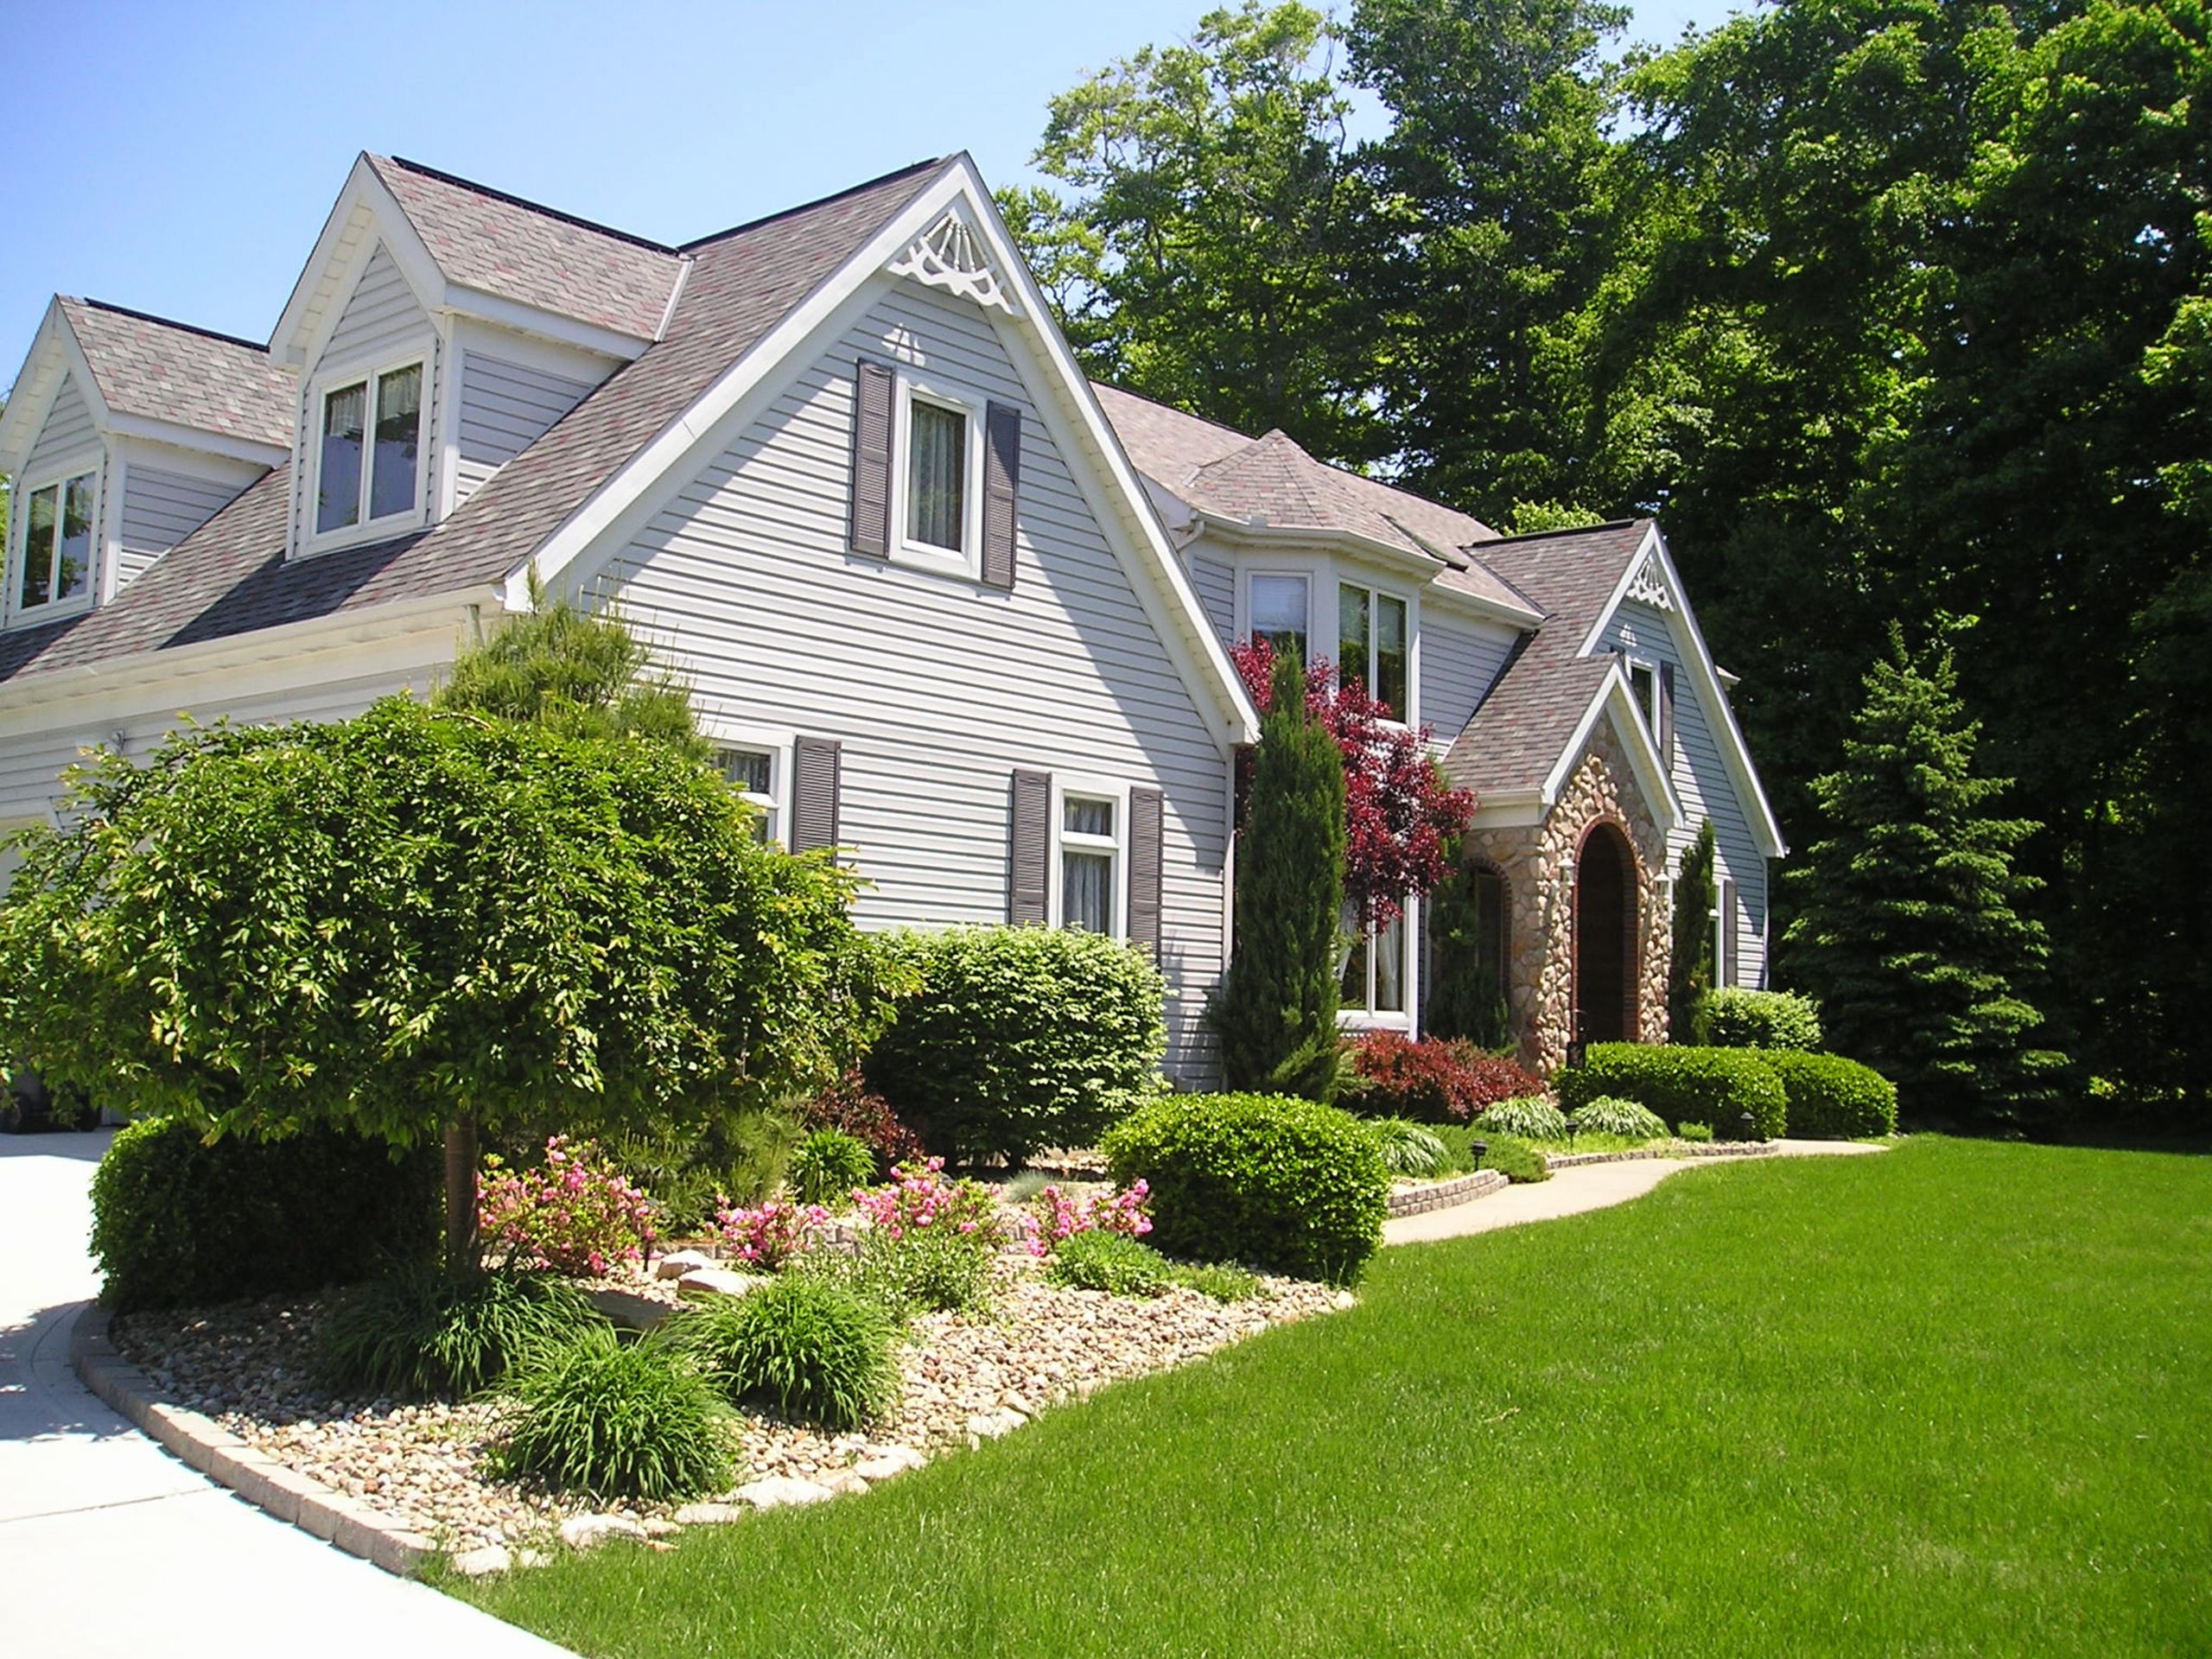 Landscape Front Of House
 10 Awesome Ways to Improve Your Curb Appeal